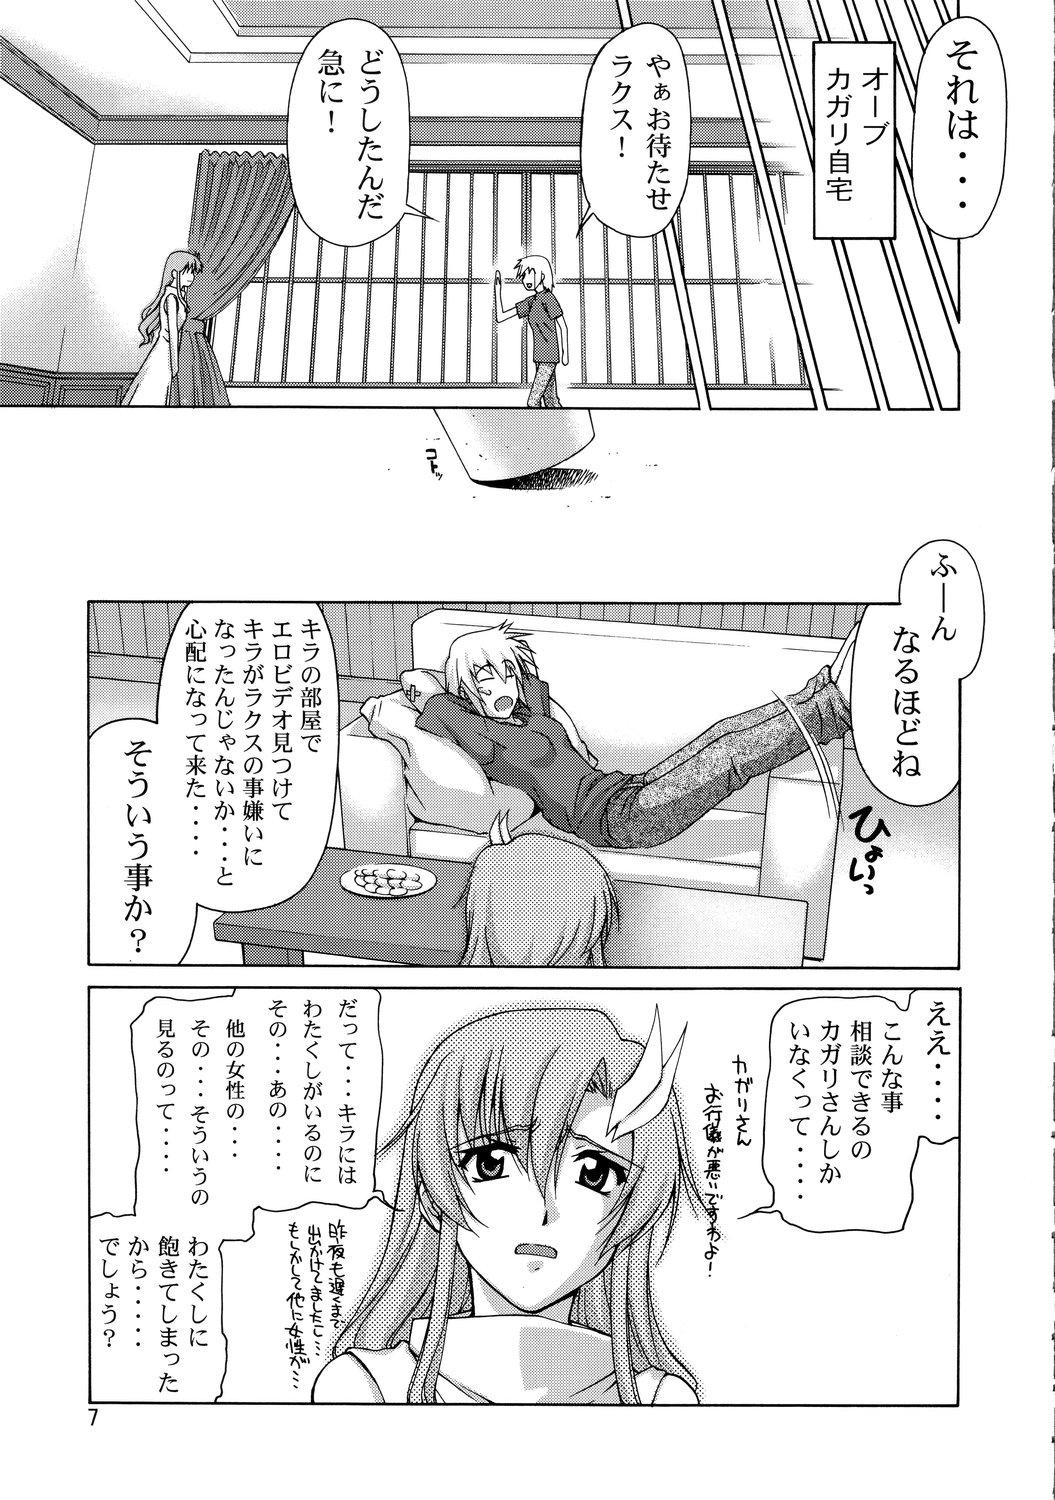 Hot Naked Women A Diva of Healing - Gundam seed destiny Passion - Page 6